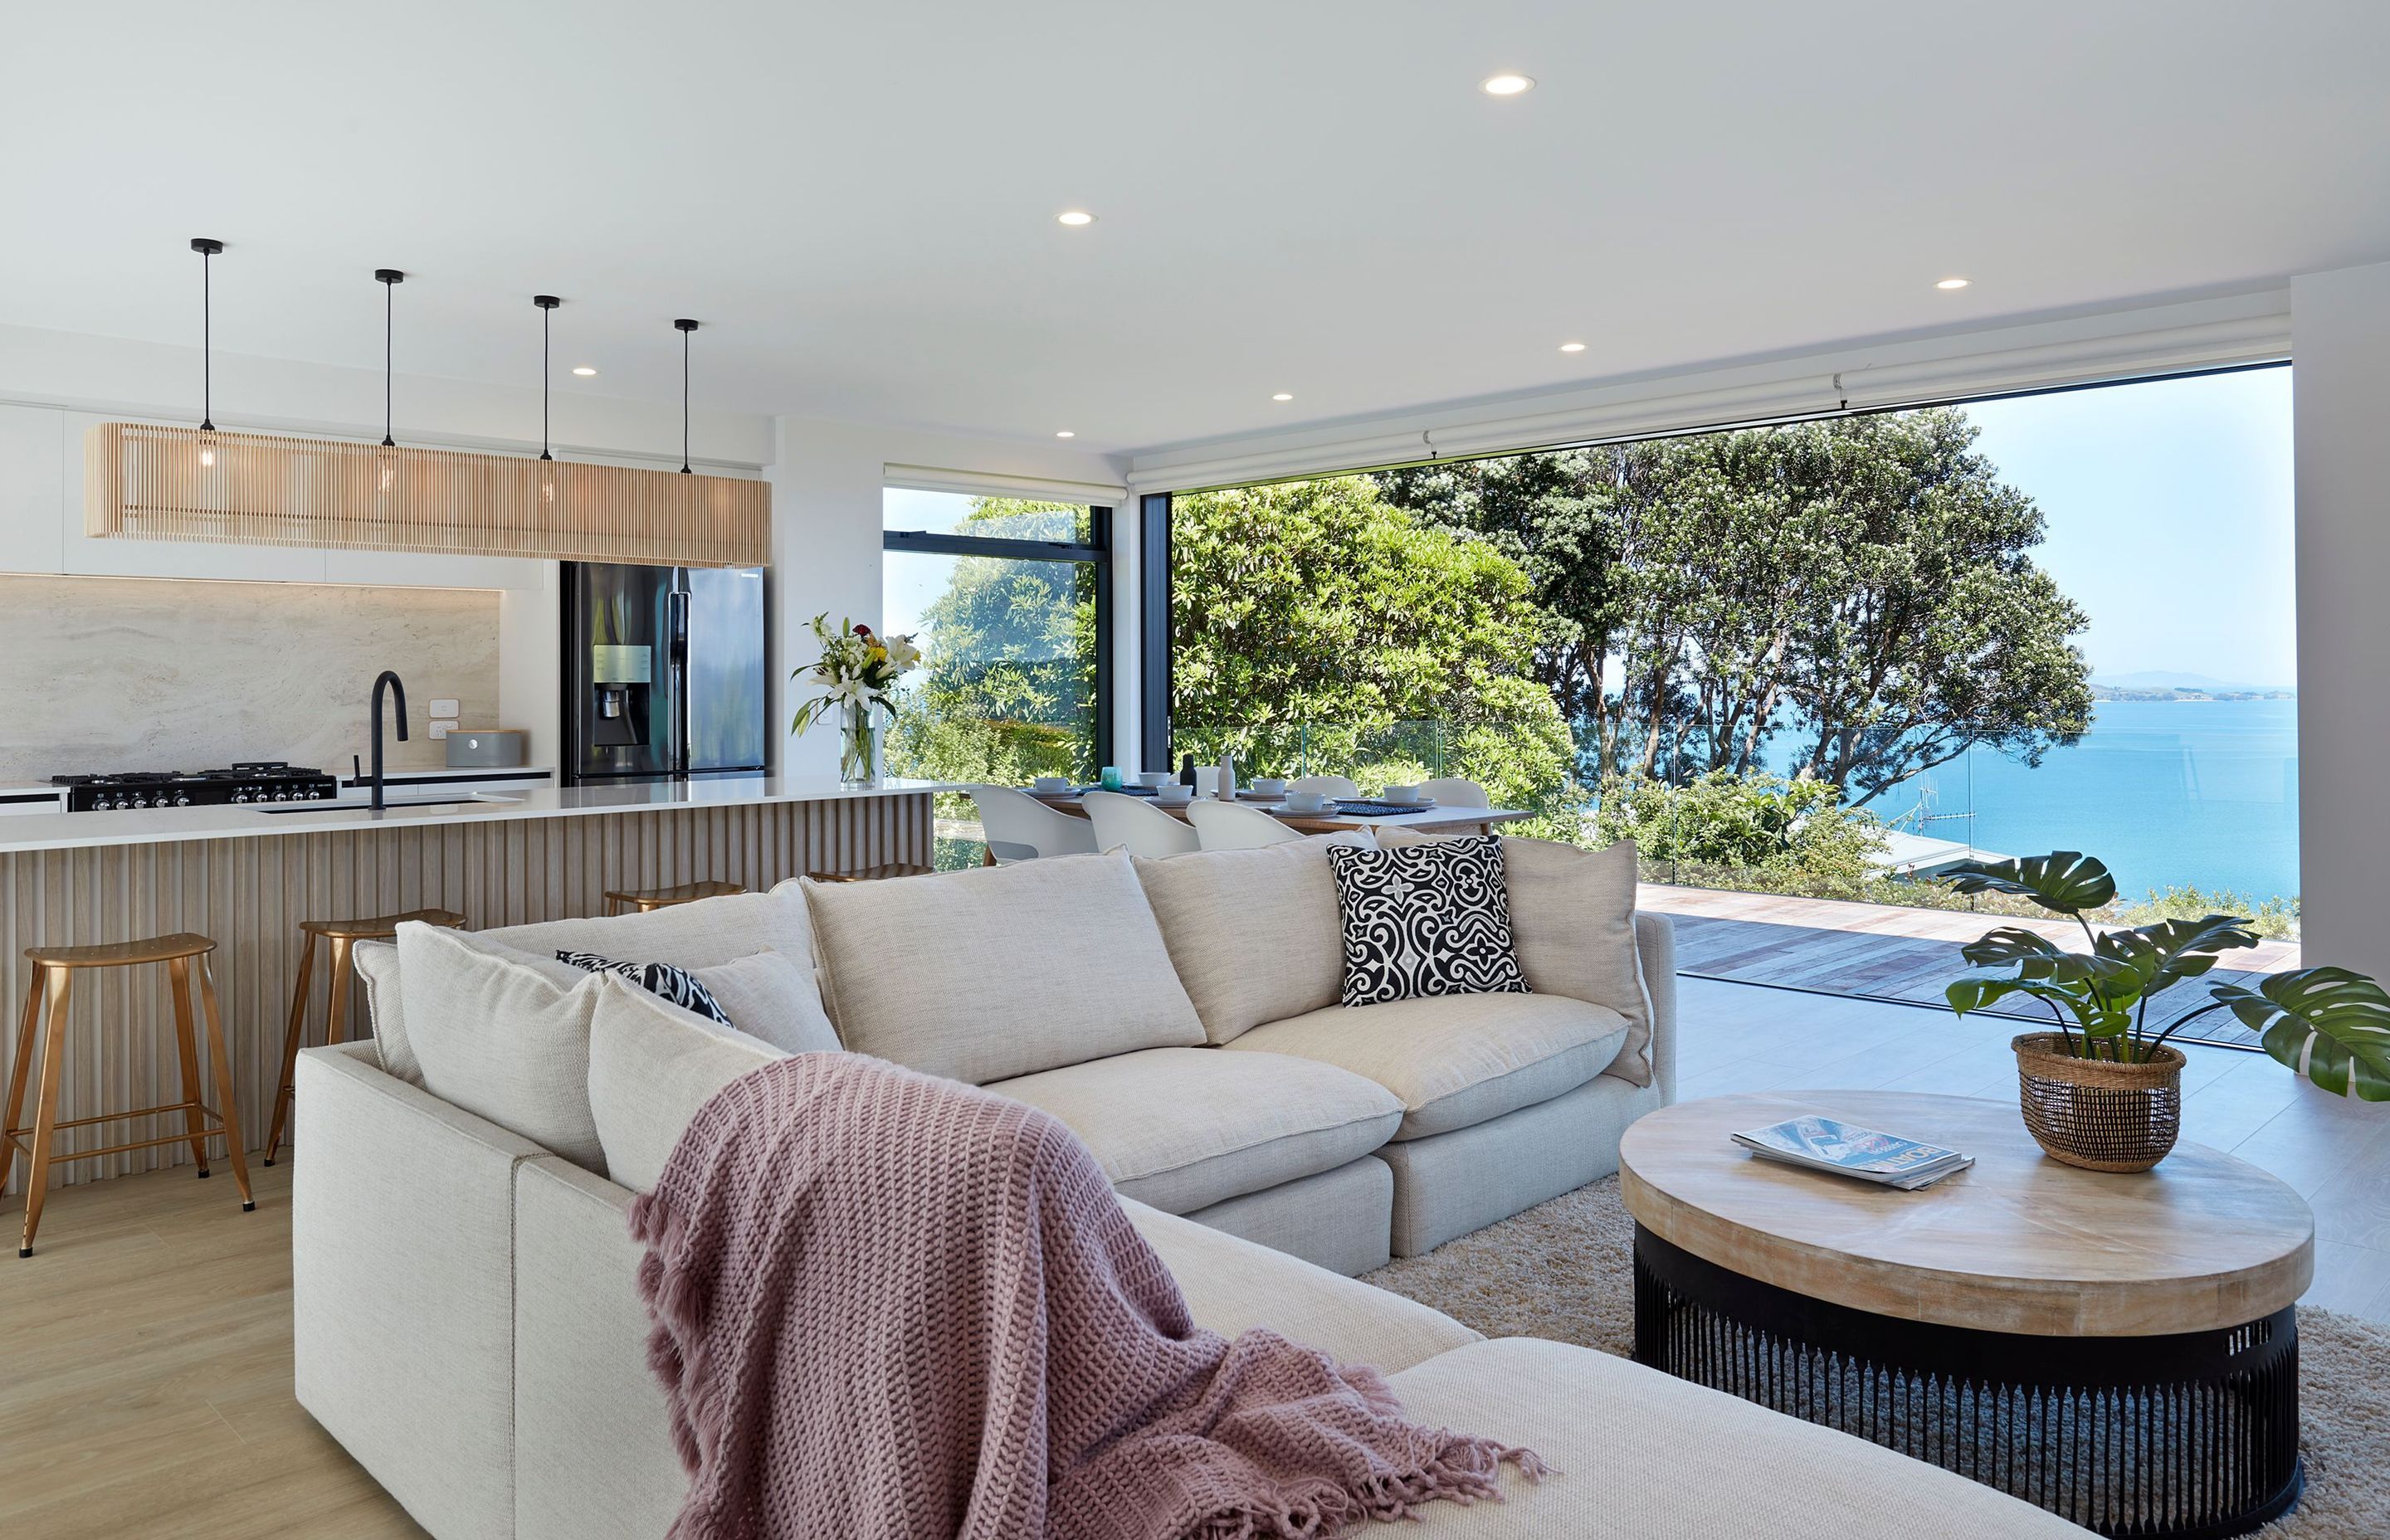 In the living room, where the double-glazed joinery from the APL Architectural and Metro series slides right back for full connection to the landscape, an L-shaped Sorrento sofa from Freedom wraps around a Jena coffee table from Republic Home.